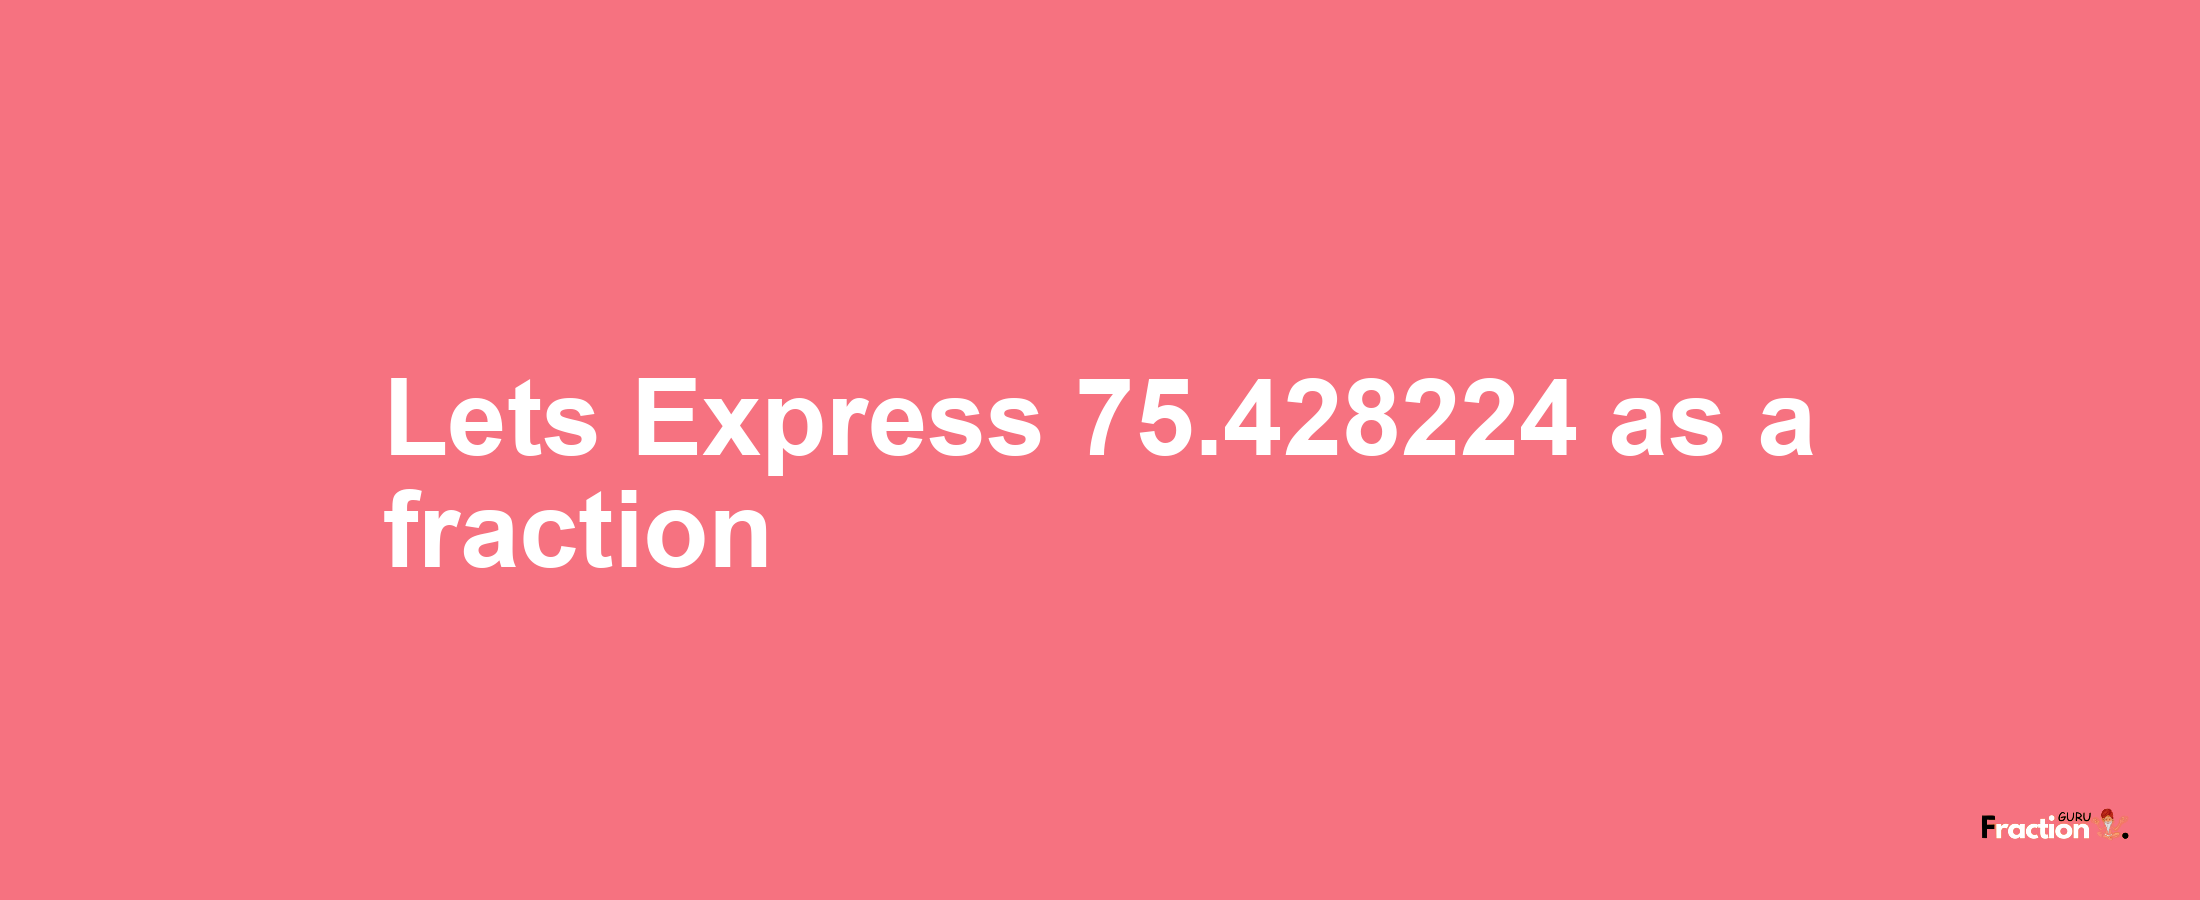 Lets Express 75.428224 as afraction